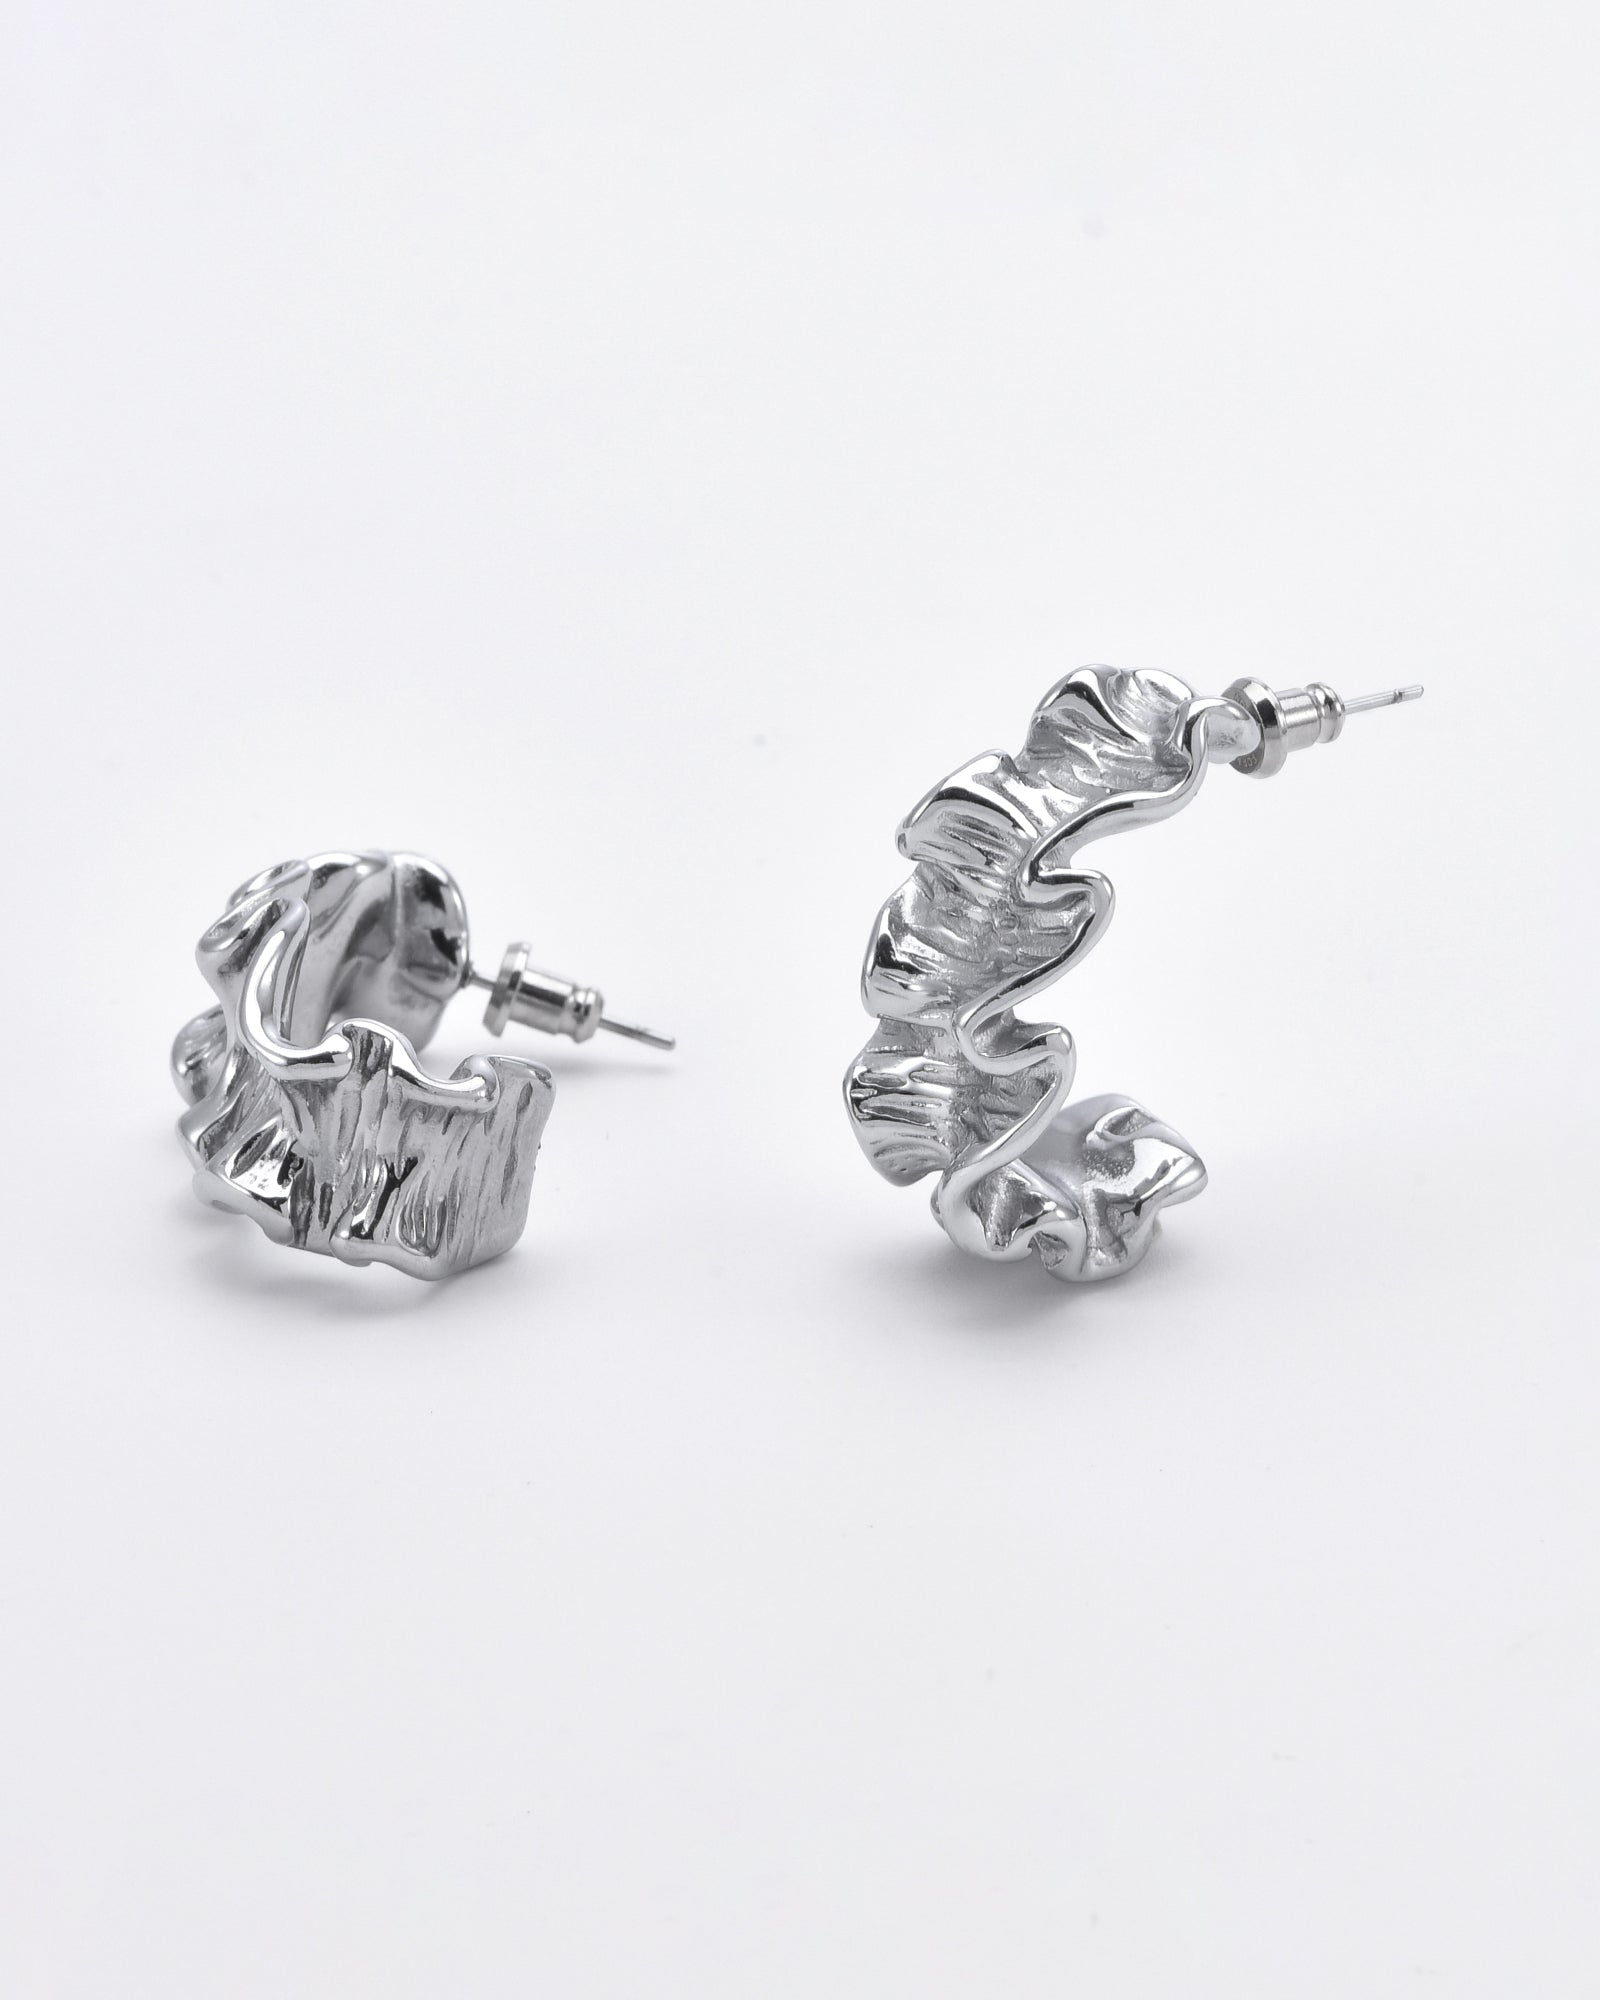 A pair of handcrafted silver hoop earrings with a ruffled, textured design. One earring is standing upright, while the other lies flat, showcasing their intricate, wavy patterns on a white background. These Athena Earrings Silver by For Art's Sake® exude elegance and artistry in every detail.